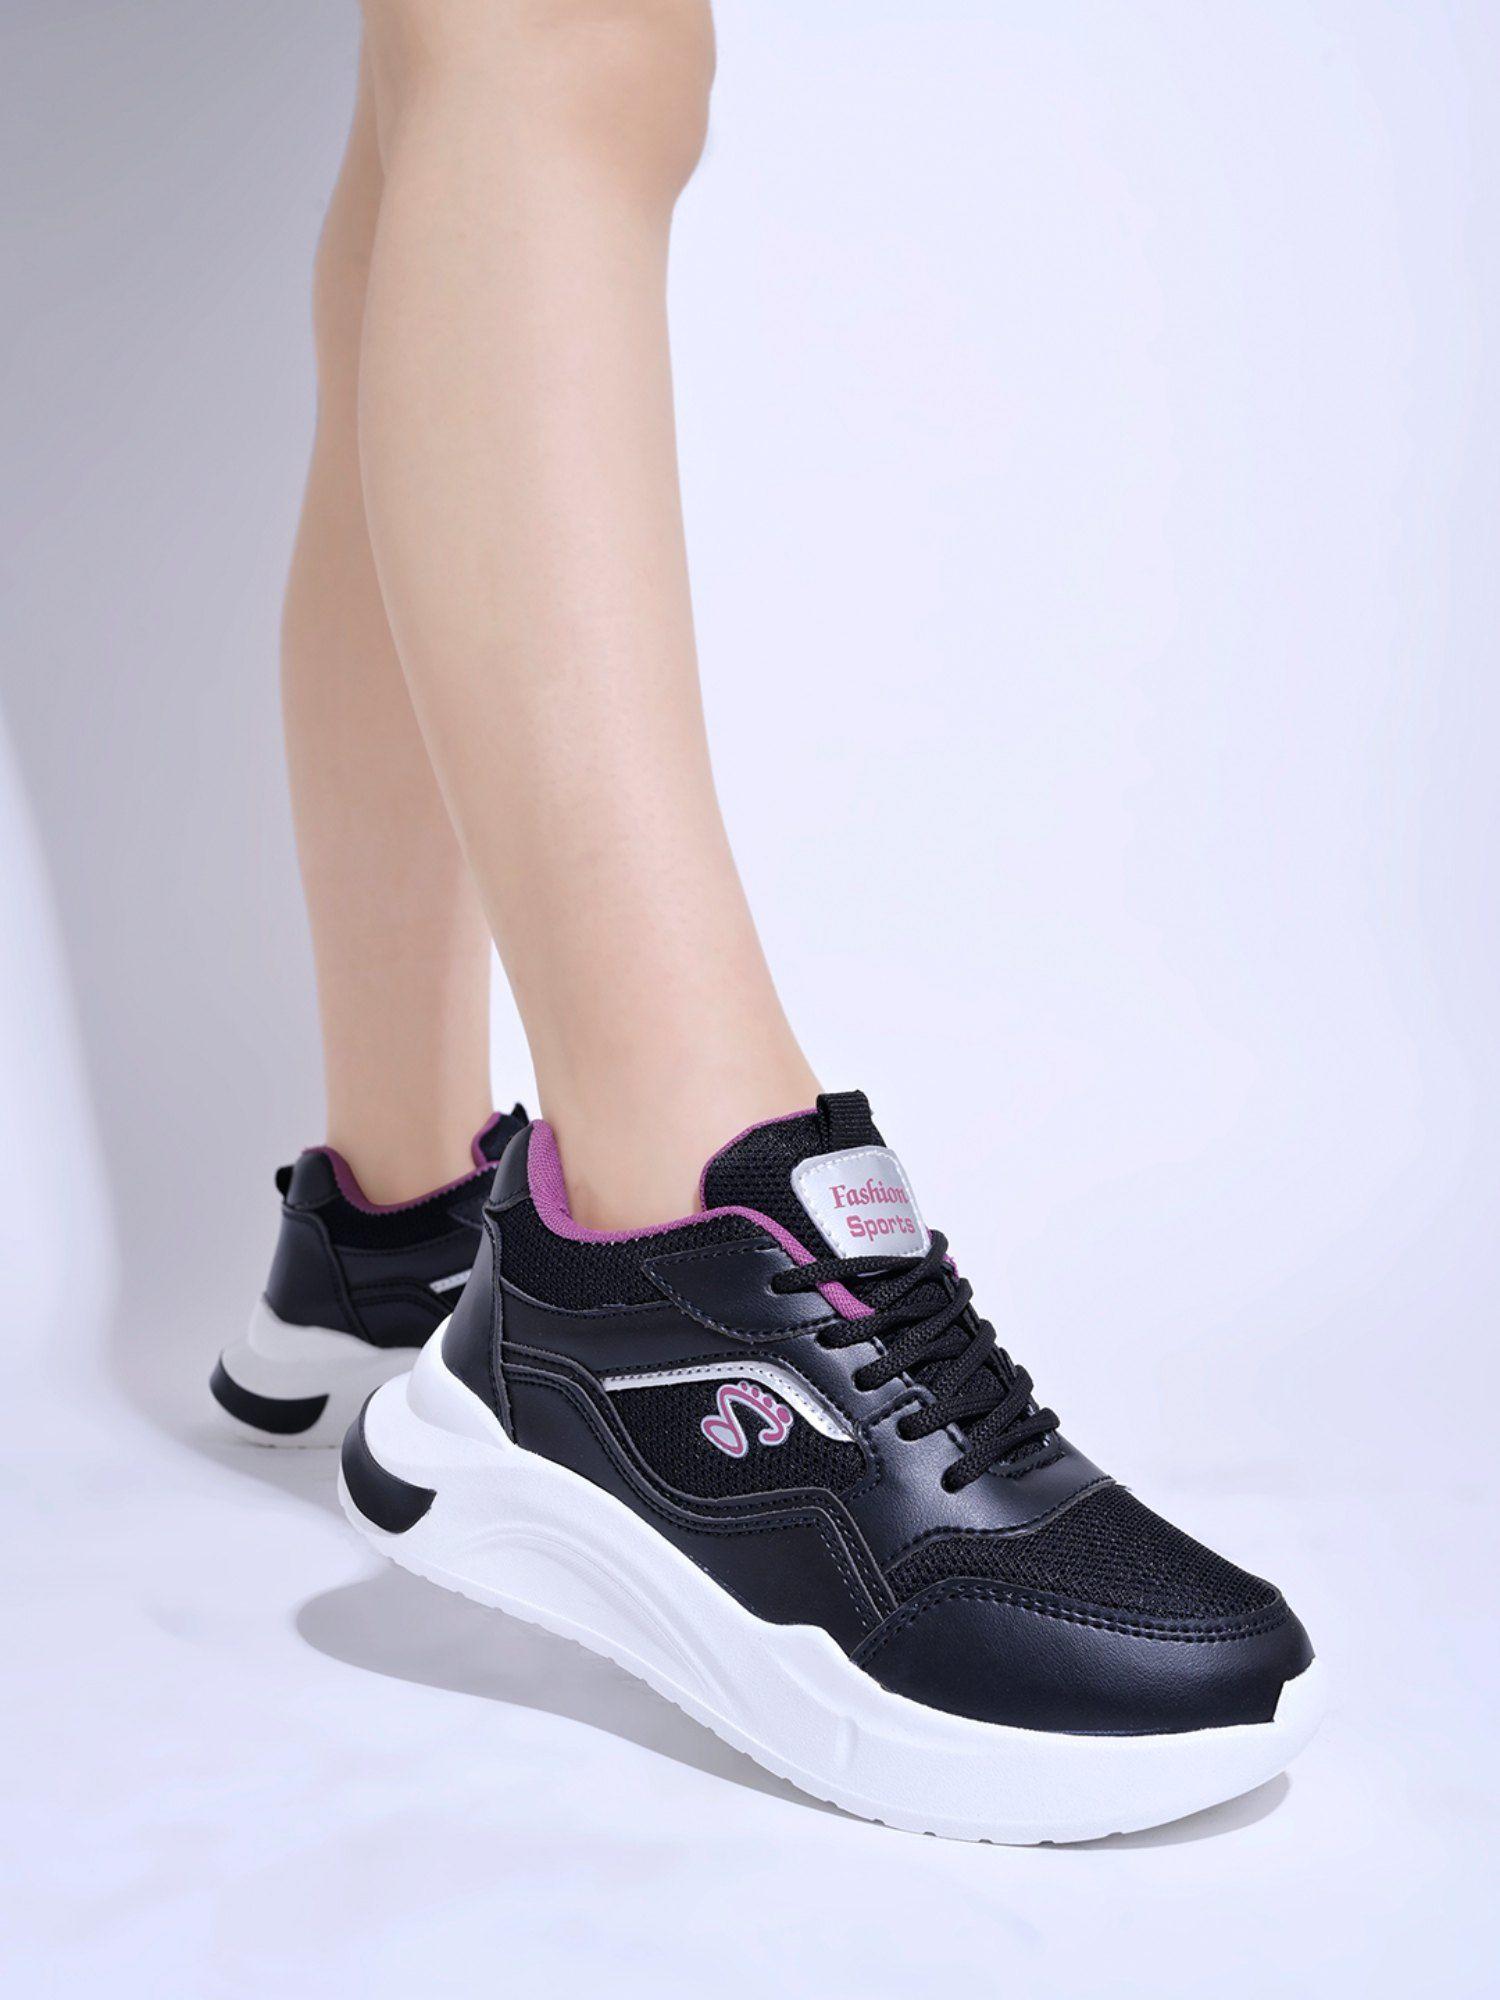 lace-up comfortable black sports shoes for girls